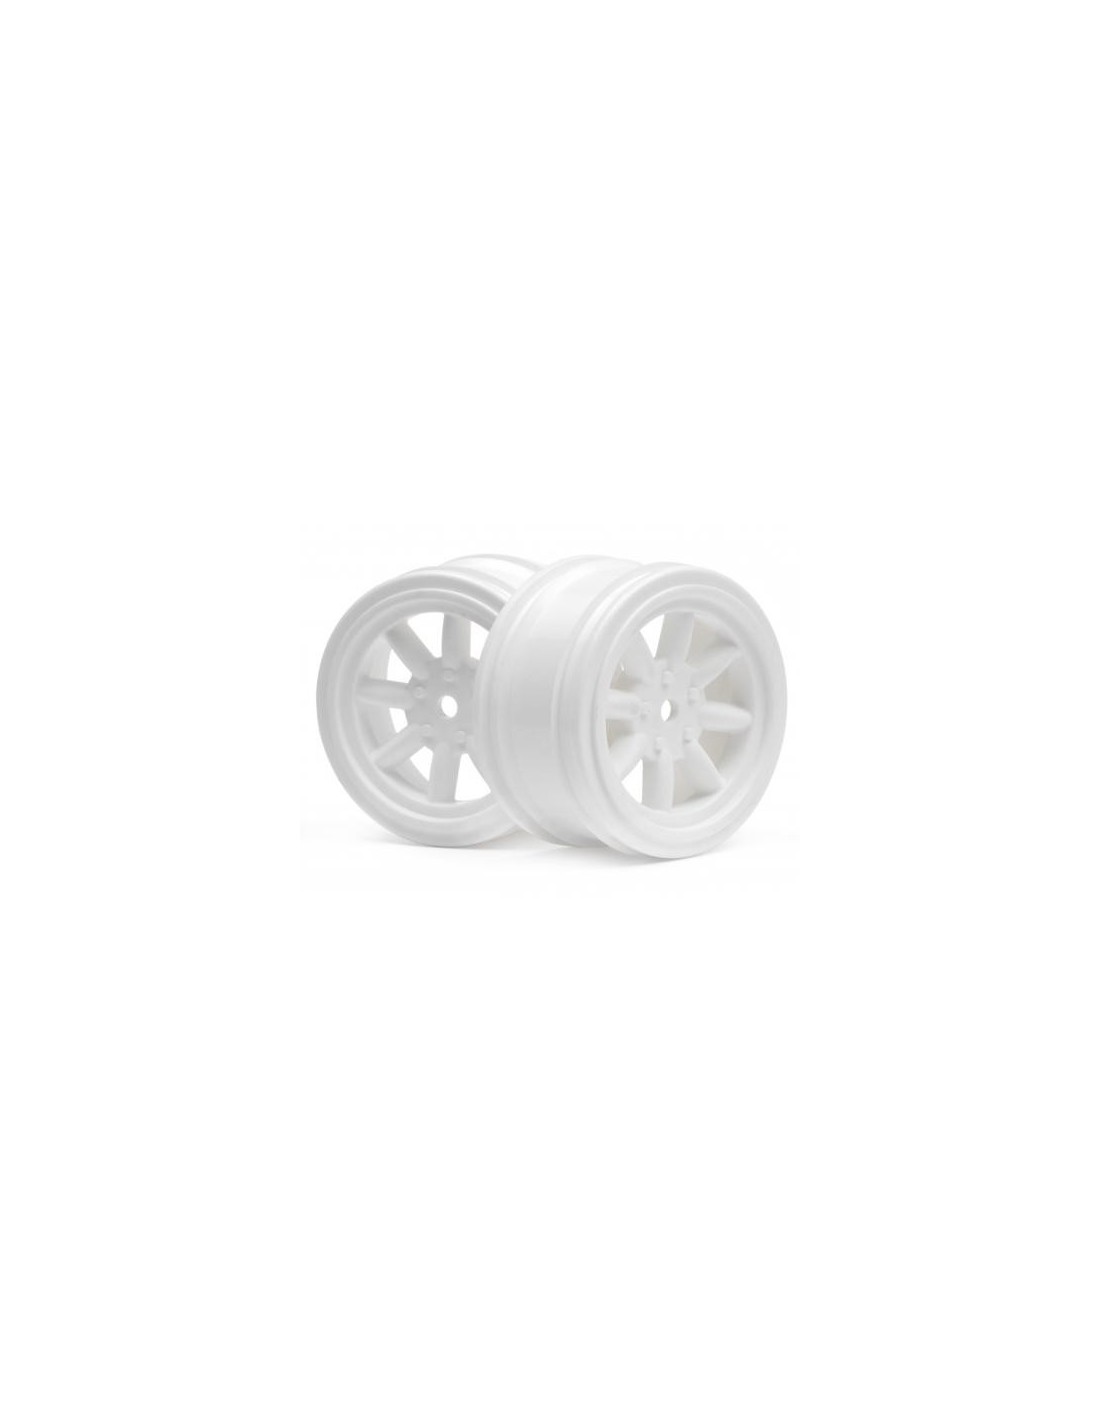 JANTES BLANCHES 26MM/0MM $ (SOLDE)